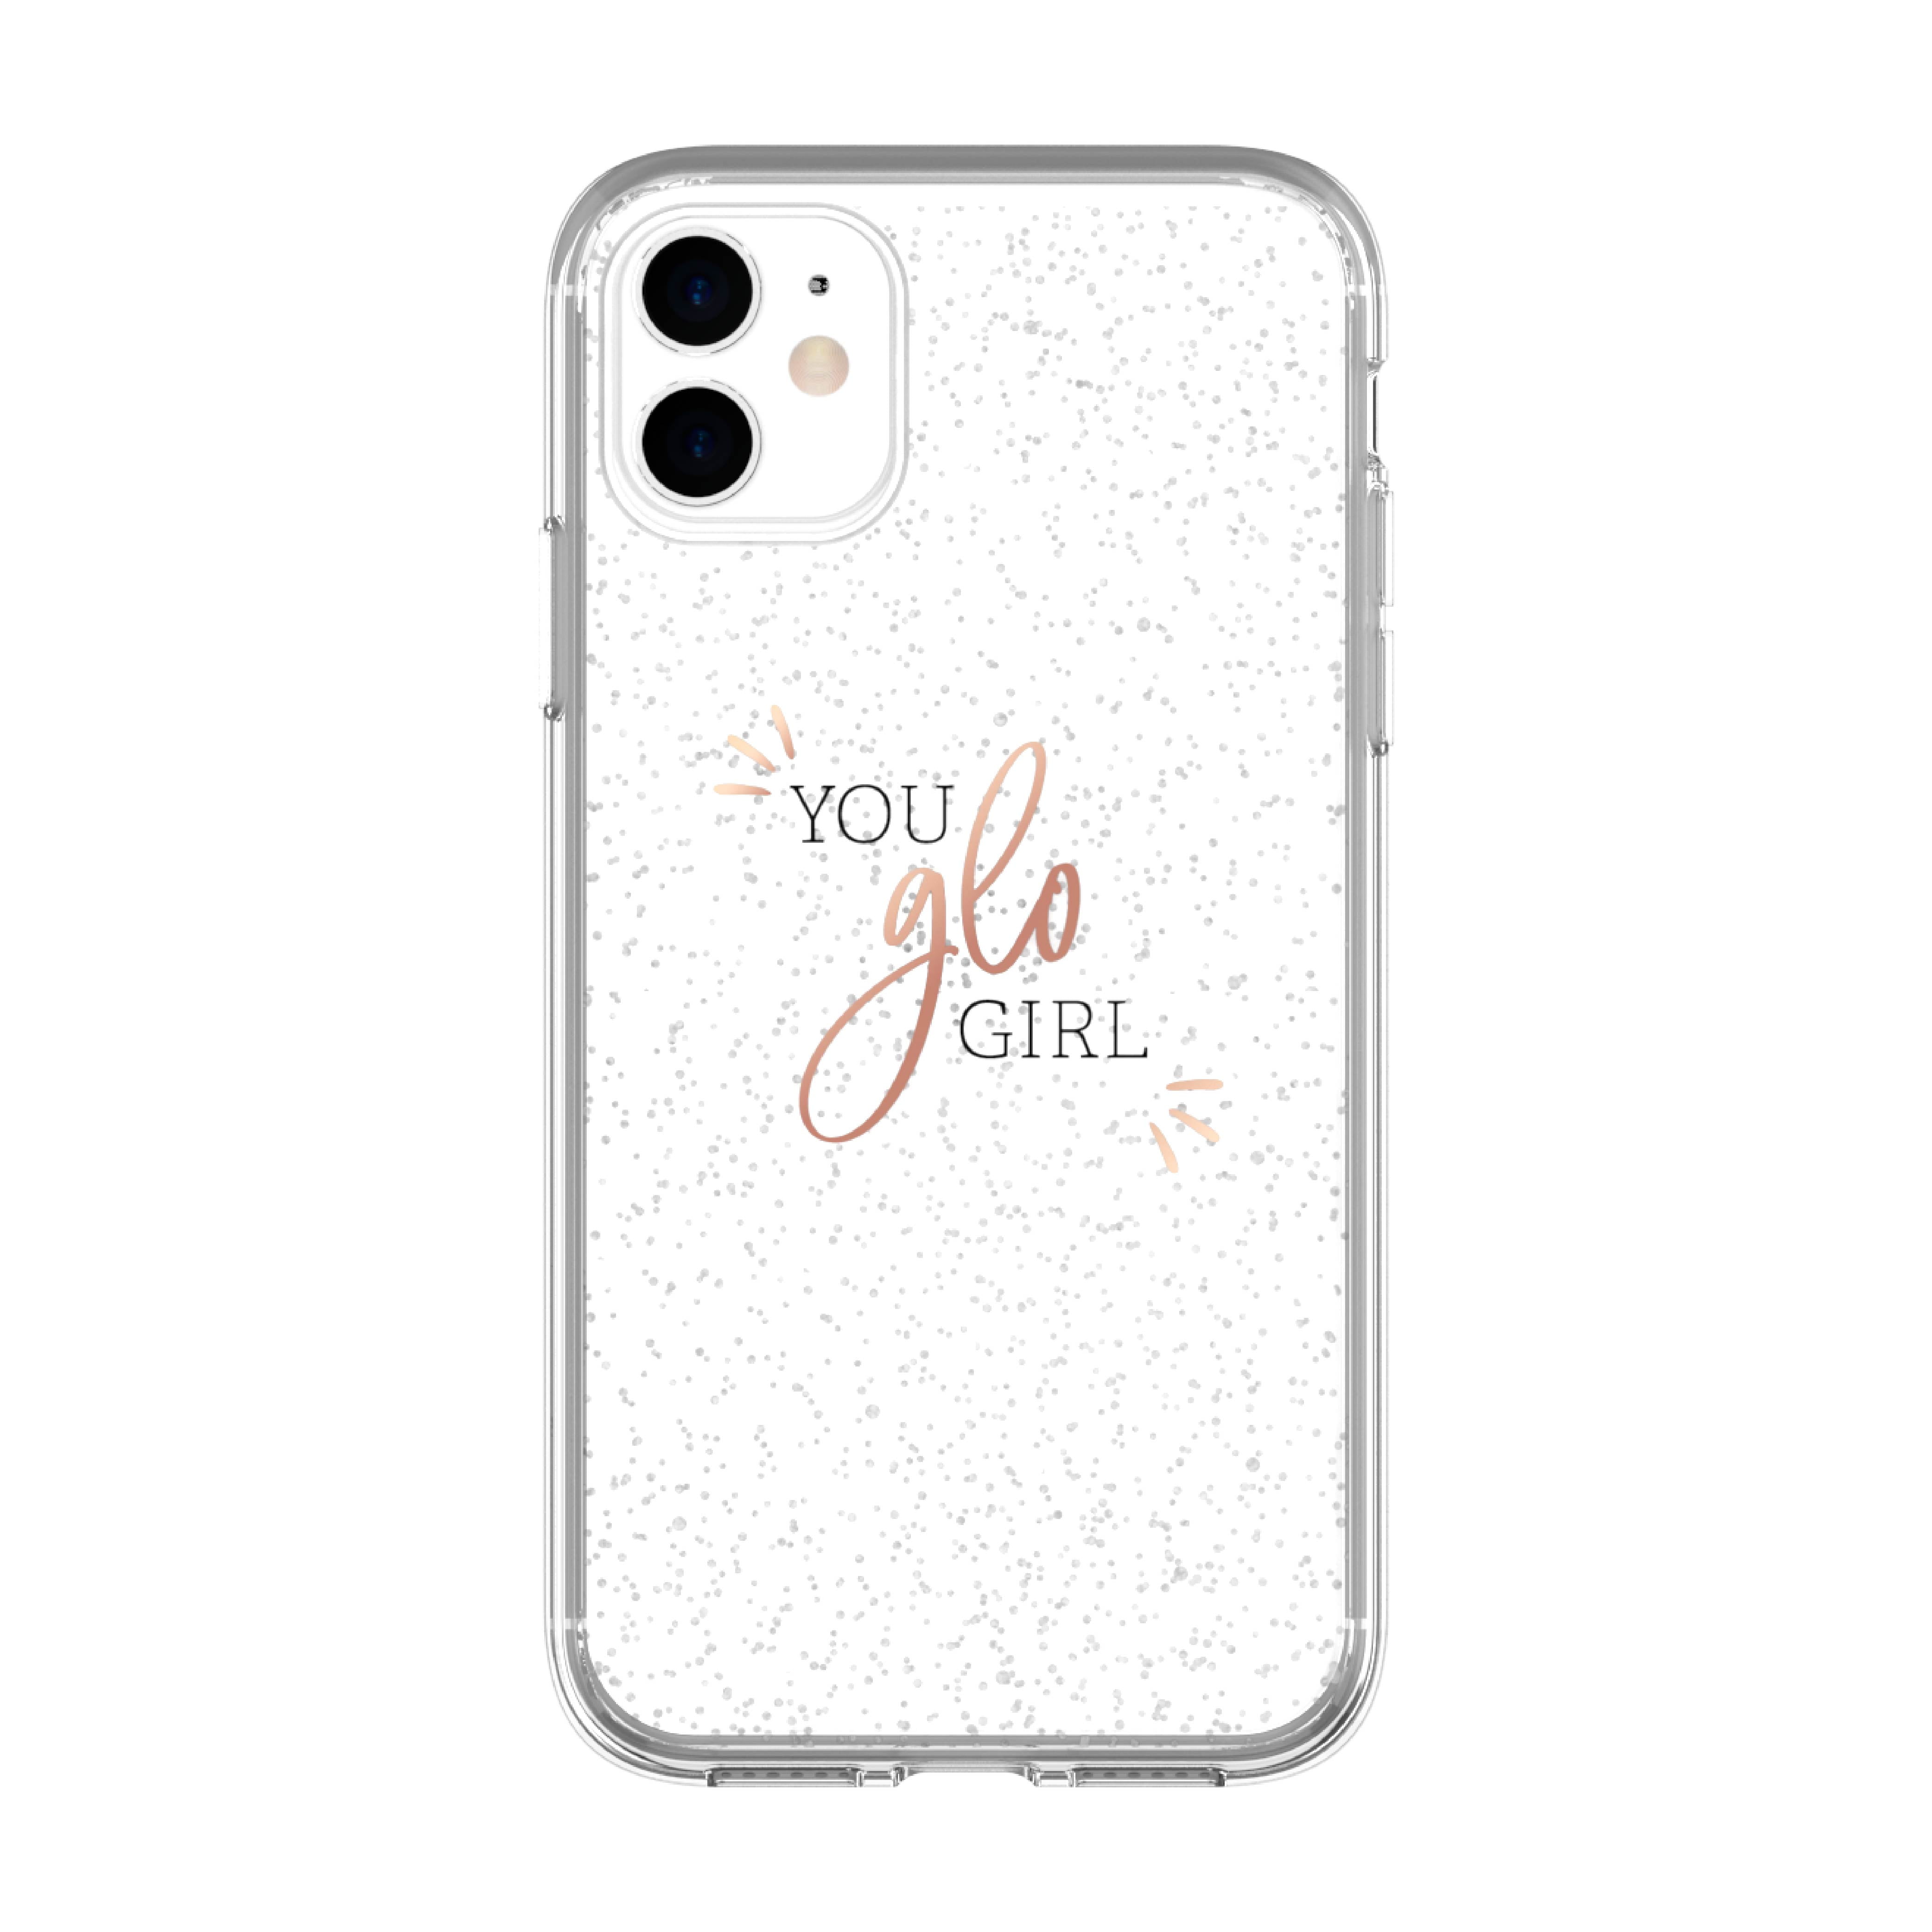 onn. Fashion Phone Case for iPhone 11, iPhone XR - You Glo Girl ...